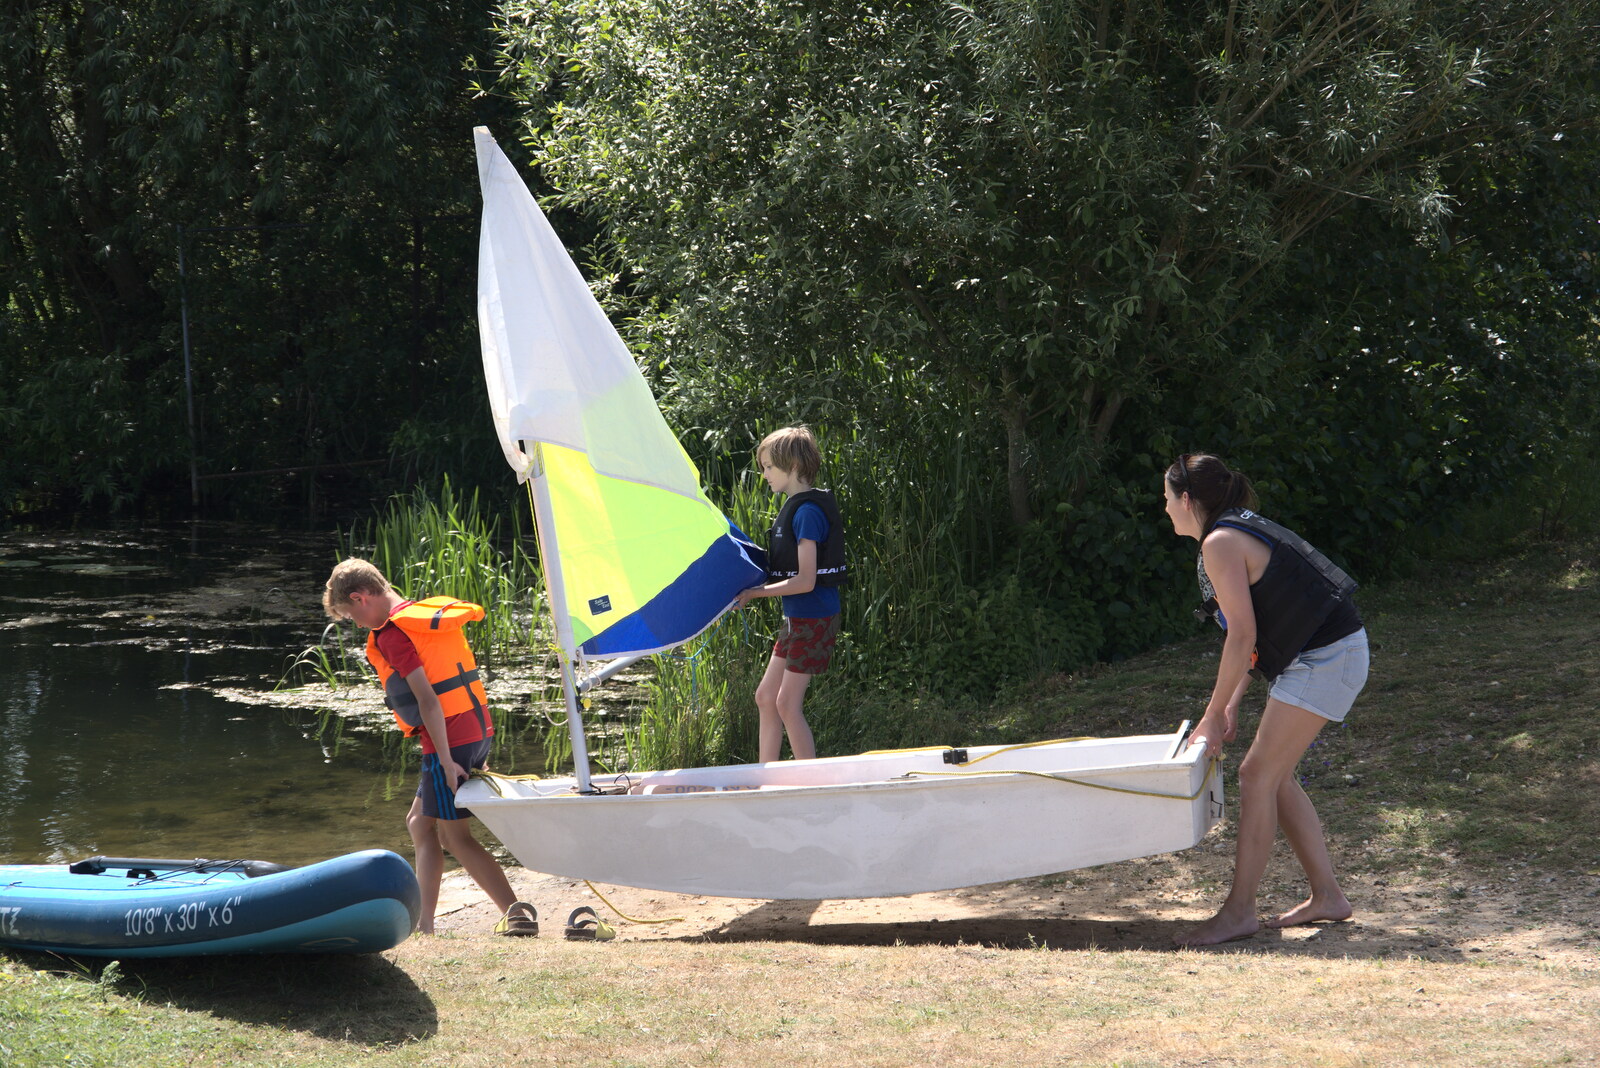 Harry helps launch a tiny dinghy from Camping at the Lake, Weybread, Harleston - 25th June 2022